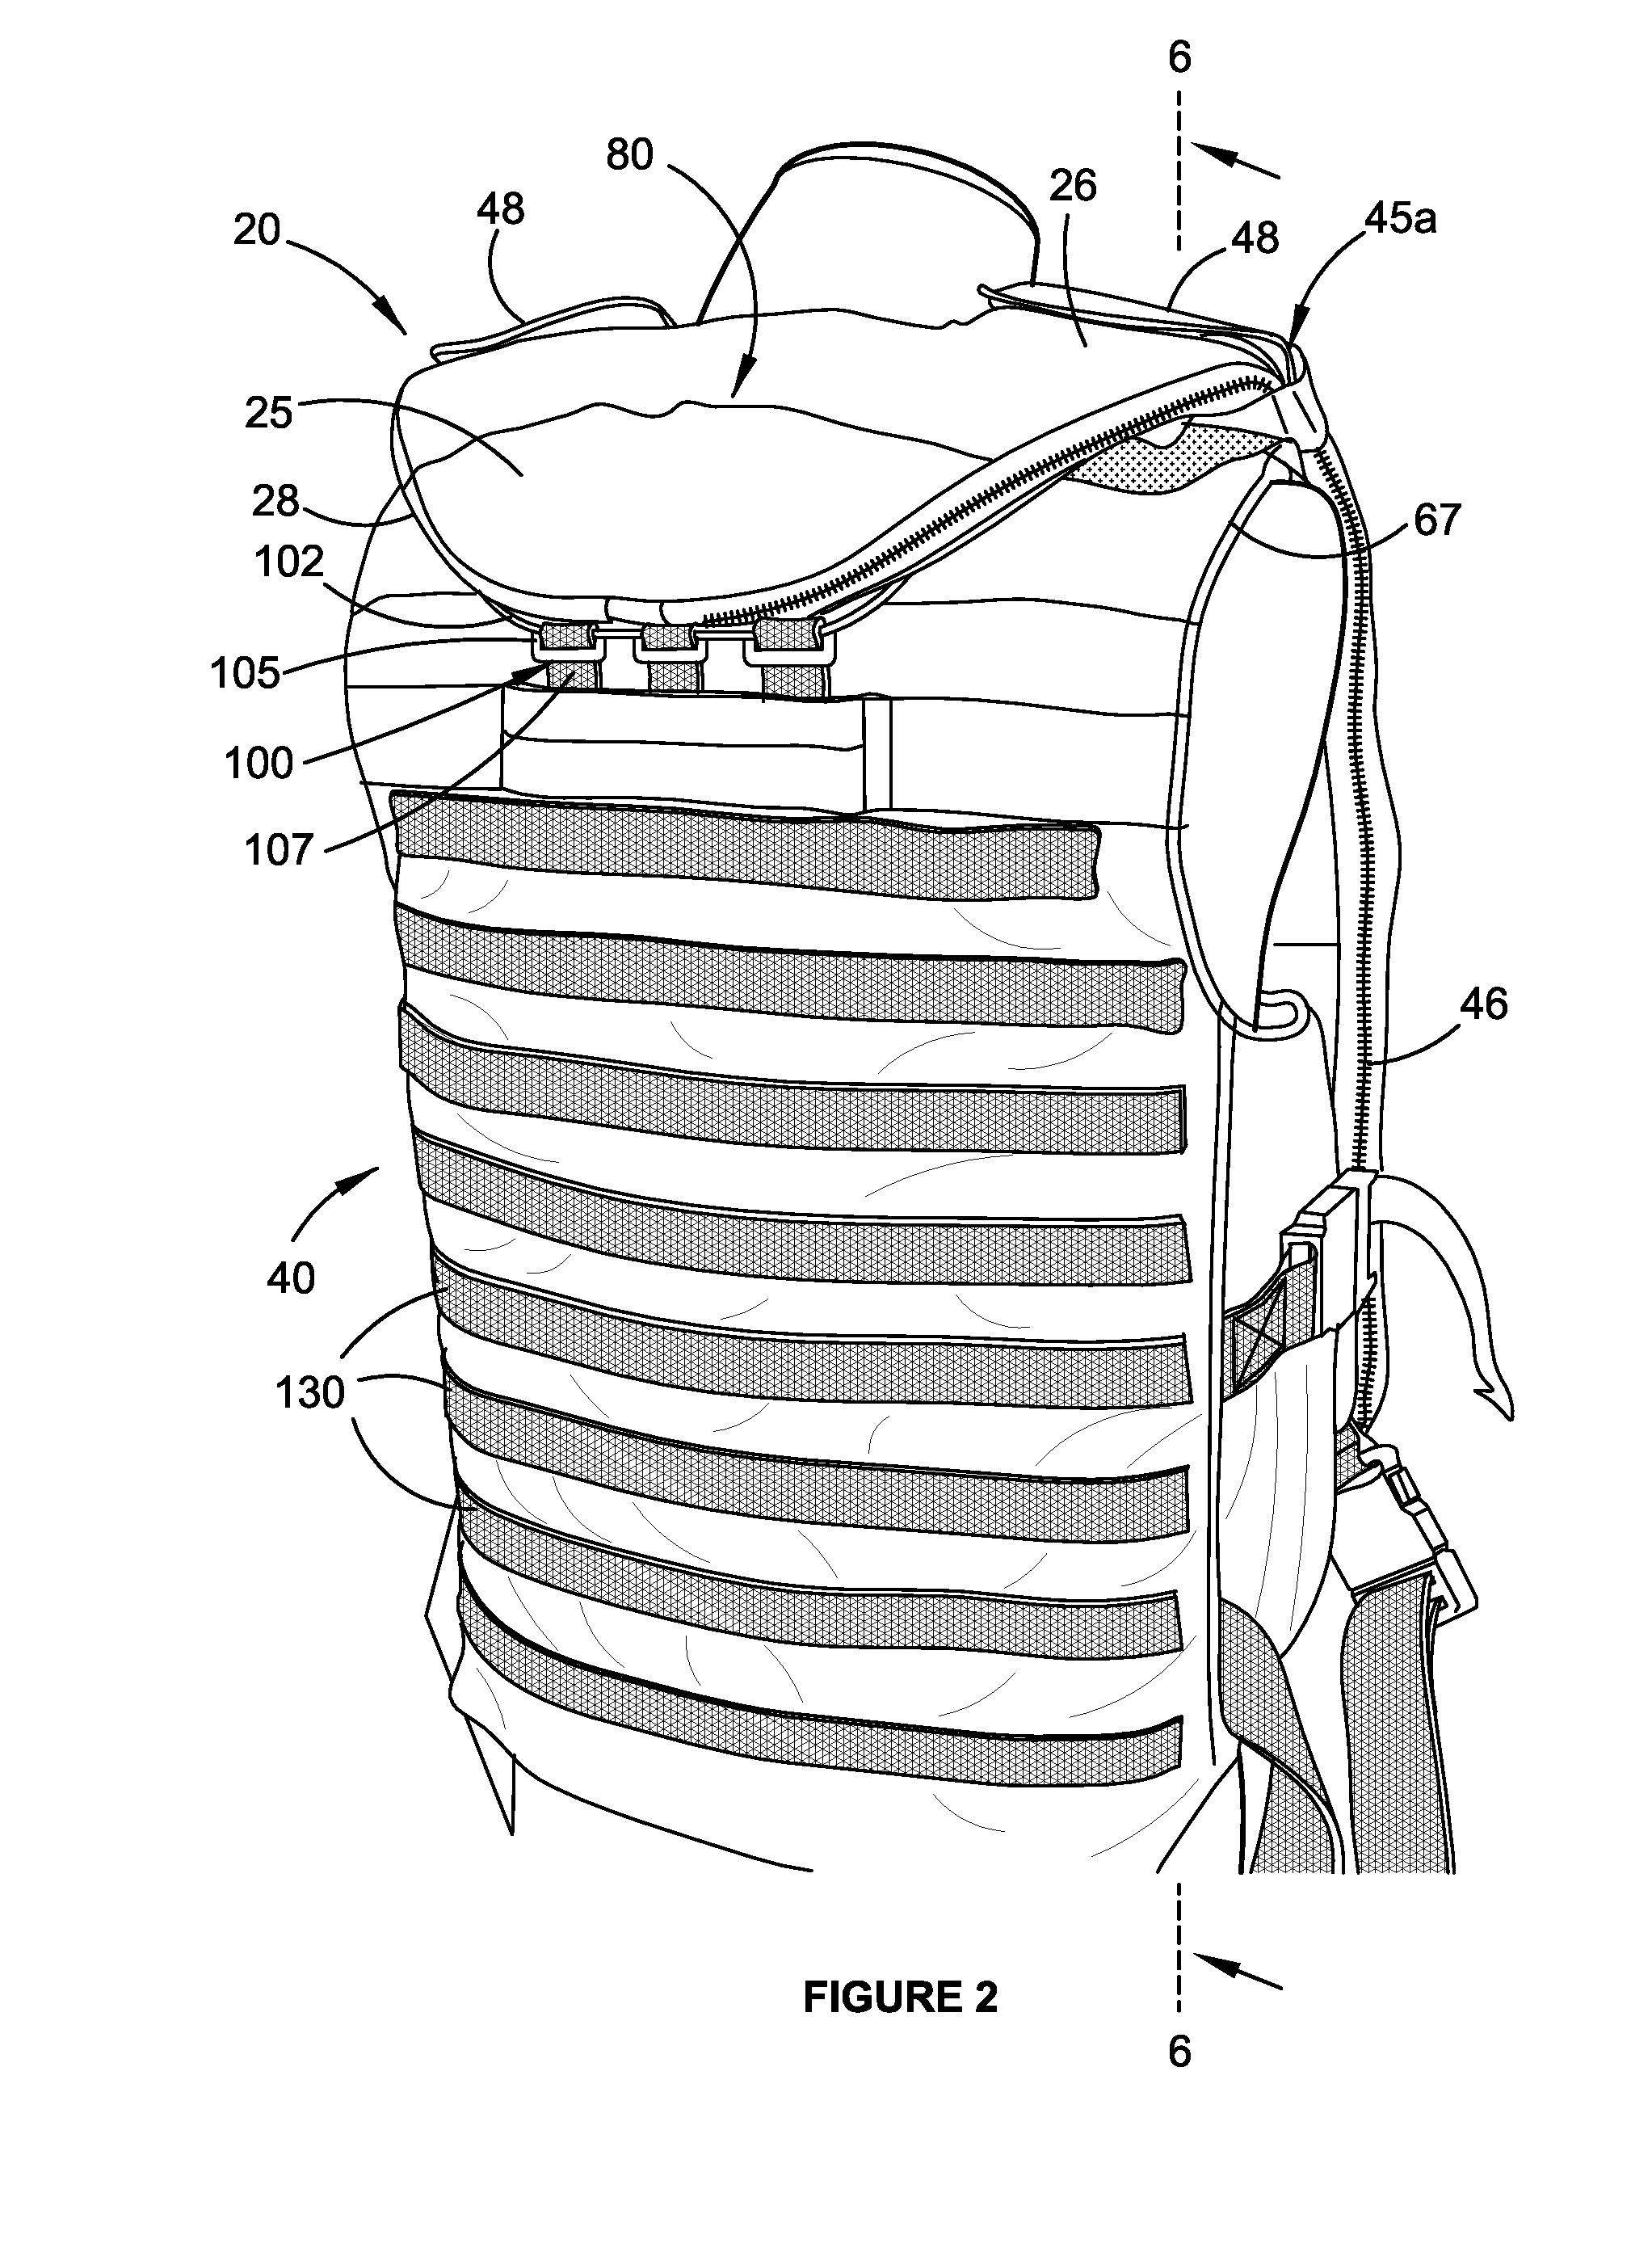 Personal protection system including a garment with body armour and a personal flotation device